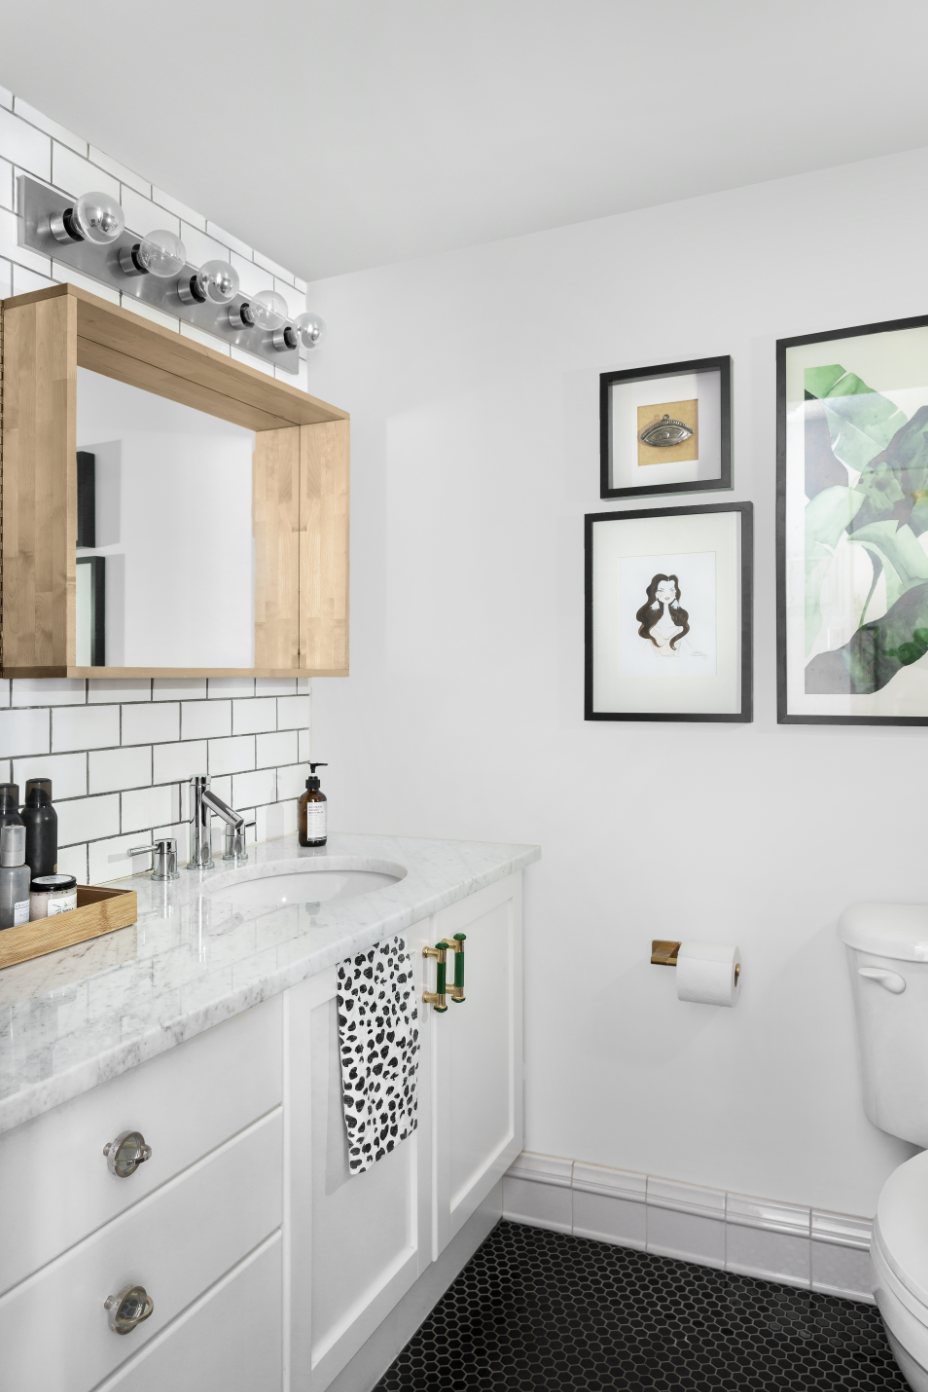 https://hips.hearstapps.com/hmg-prod/images/guest-bathroom-ideas-reena-sotropa-1644953758.png?crop=1xw:0.9942857142857143xh;center,top&resize=980:*